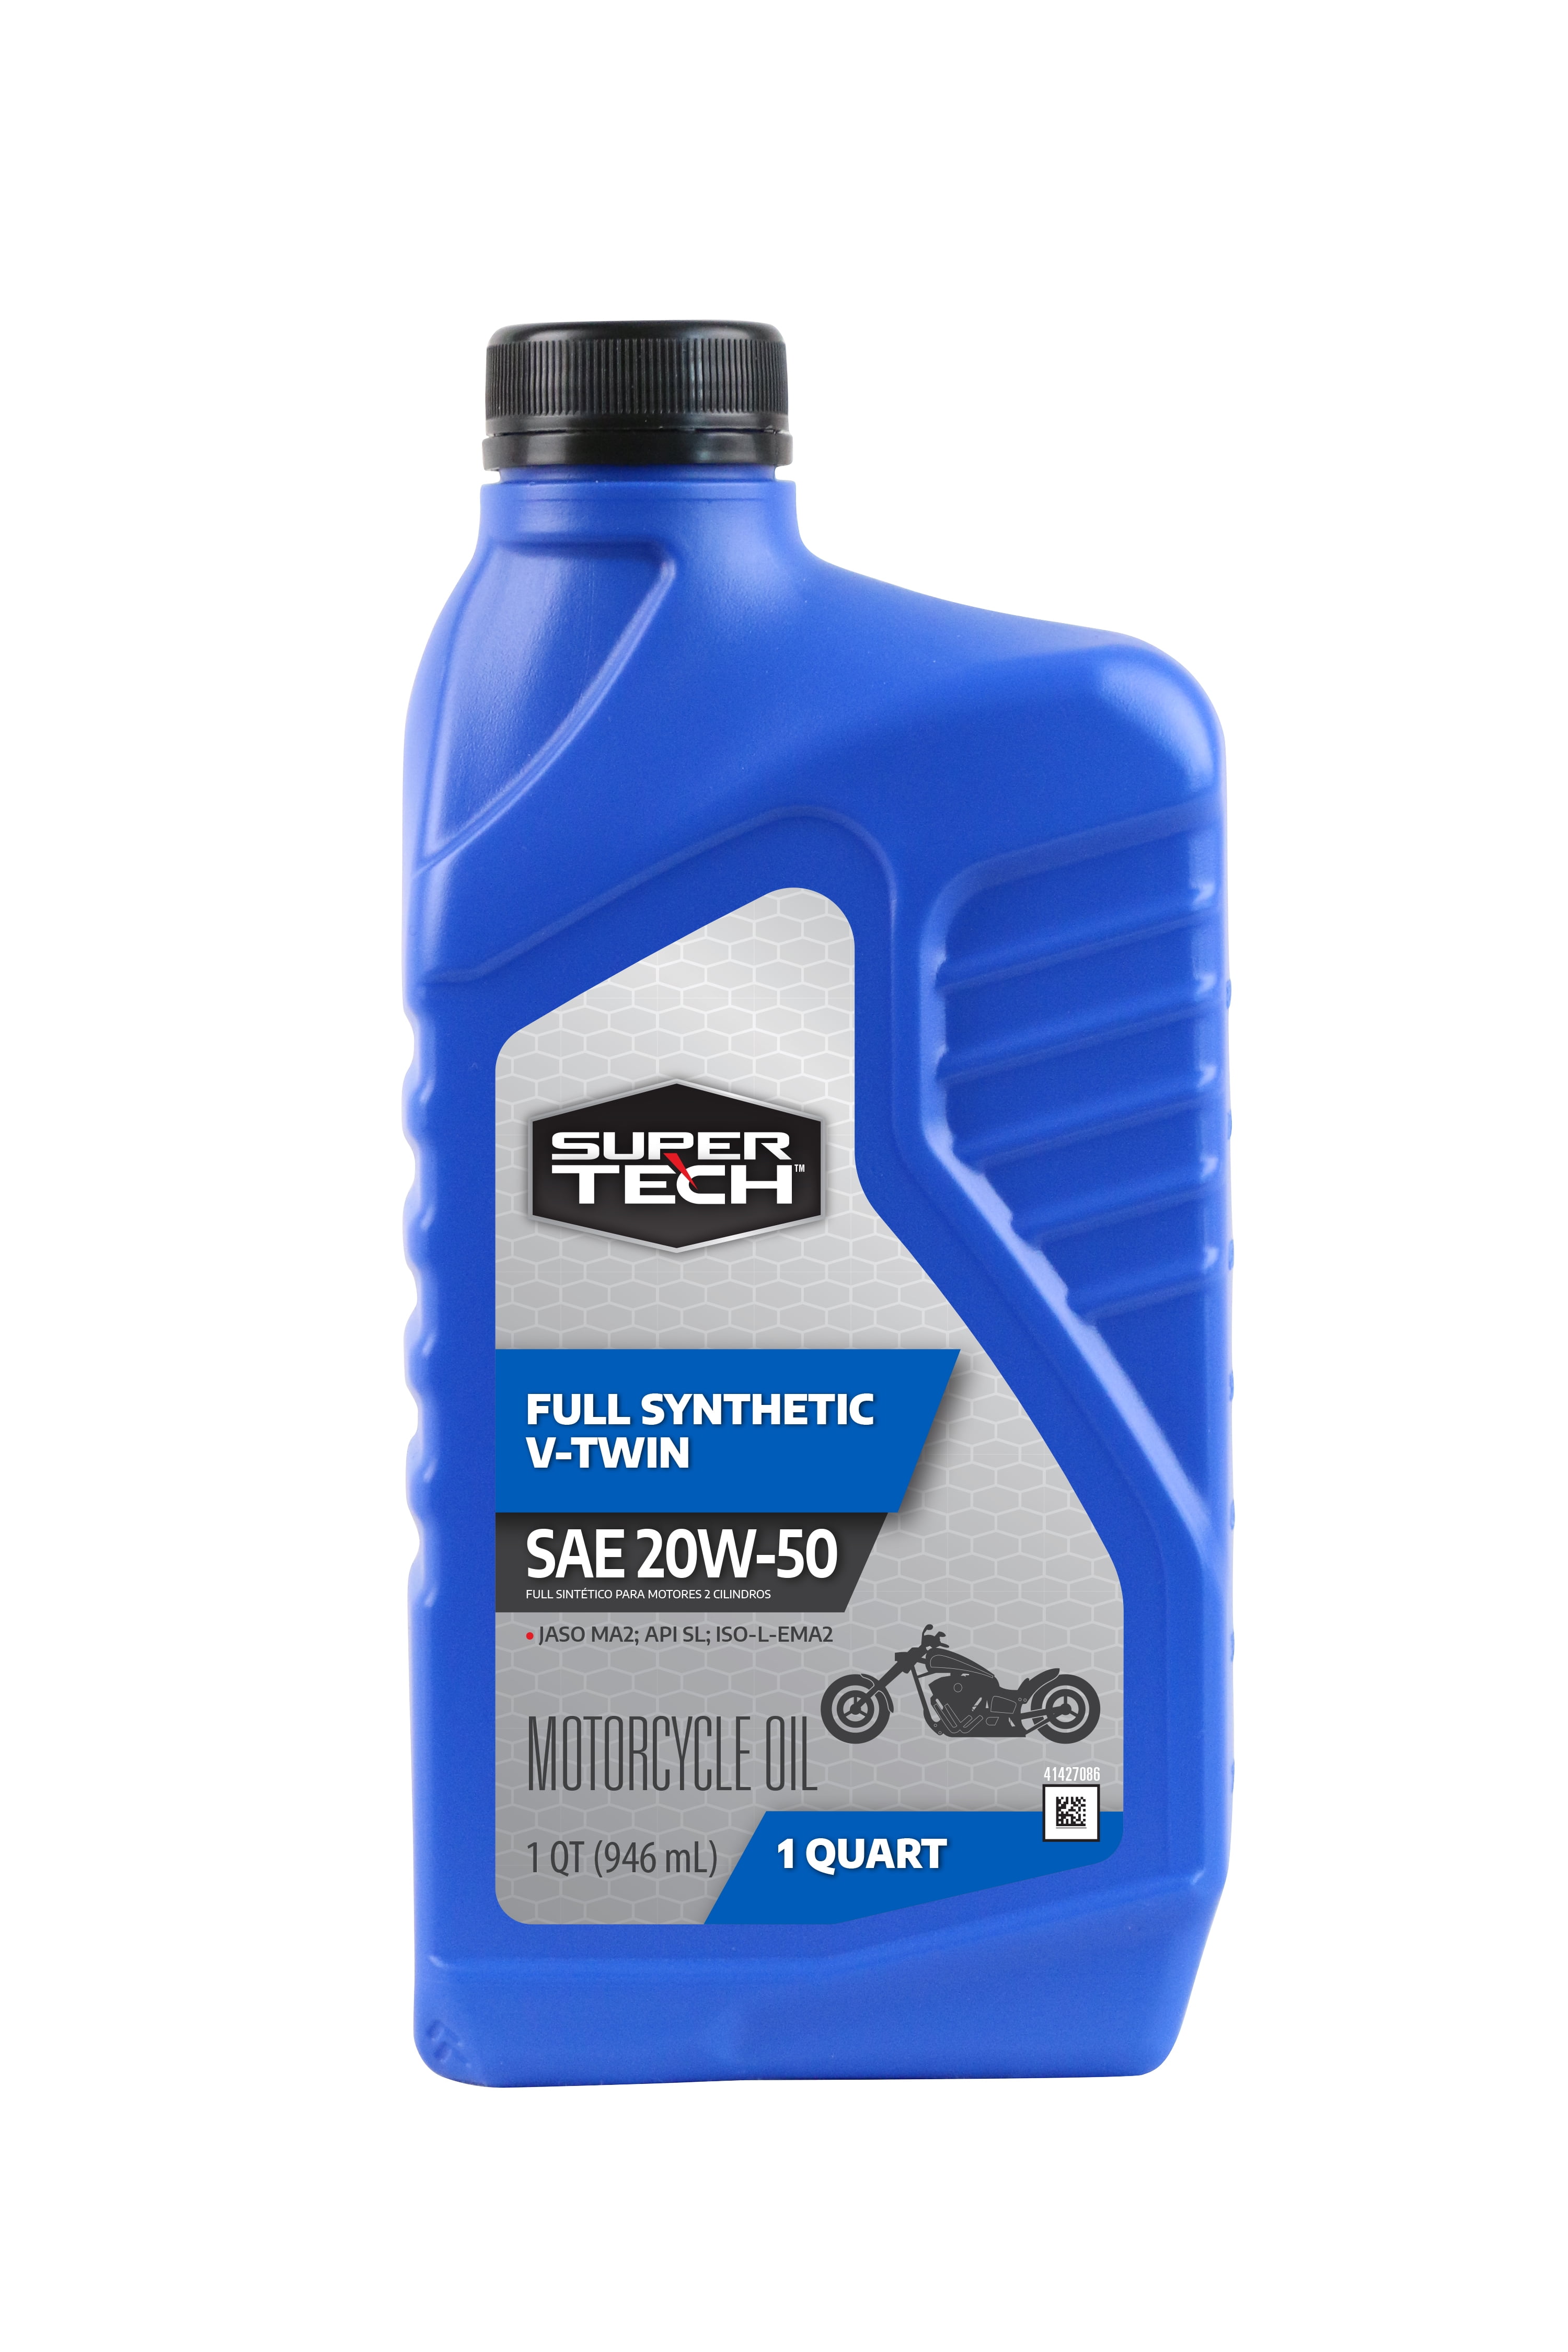 Super Tech Full Synthetic SAE 20W-50 V-Twin Motorcycle Oil, 1 Quart